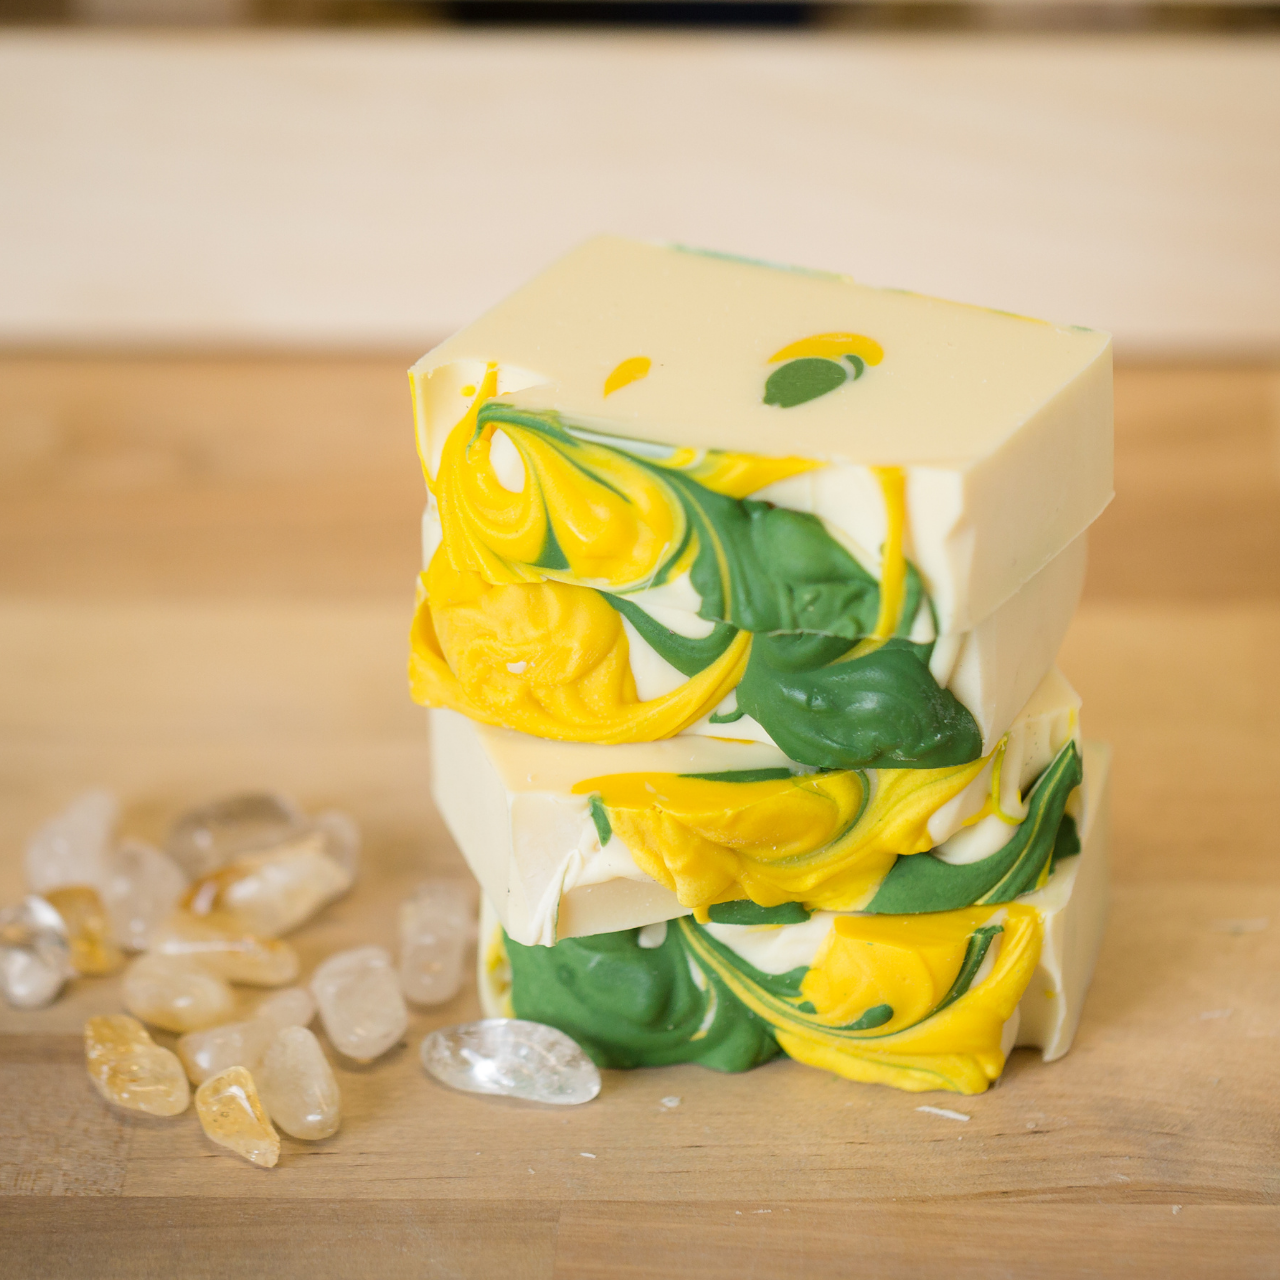 Gayatri will have you beaming bright like the sun. This soap is fresh and uplifting with its blend of lemongrass and peppermint.